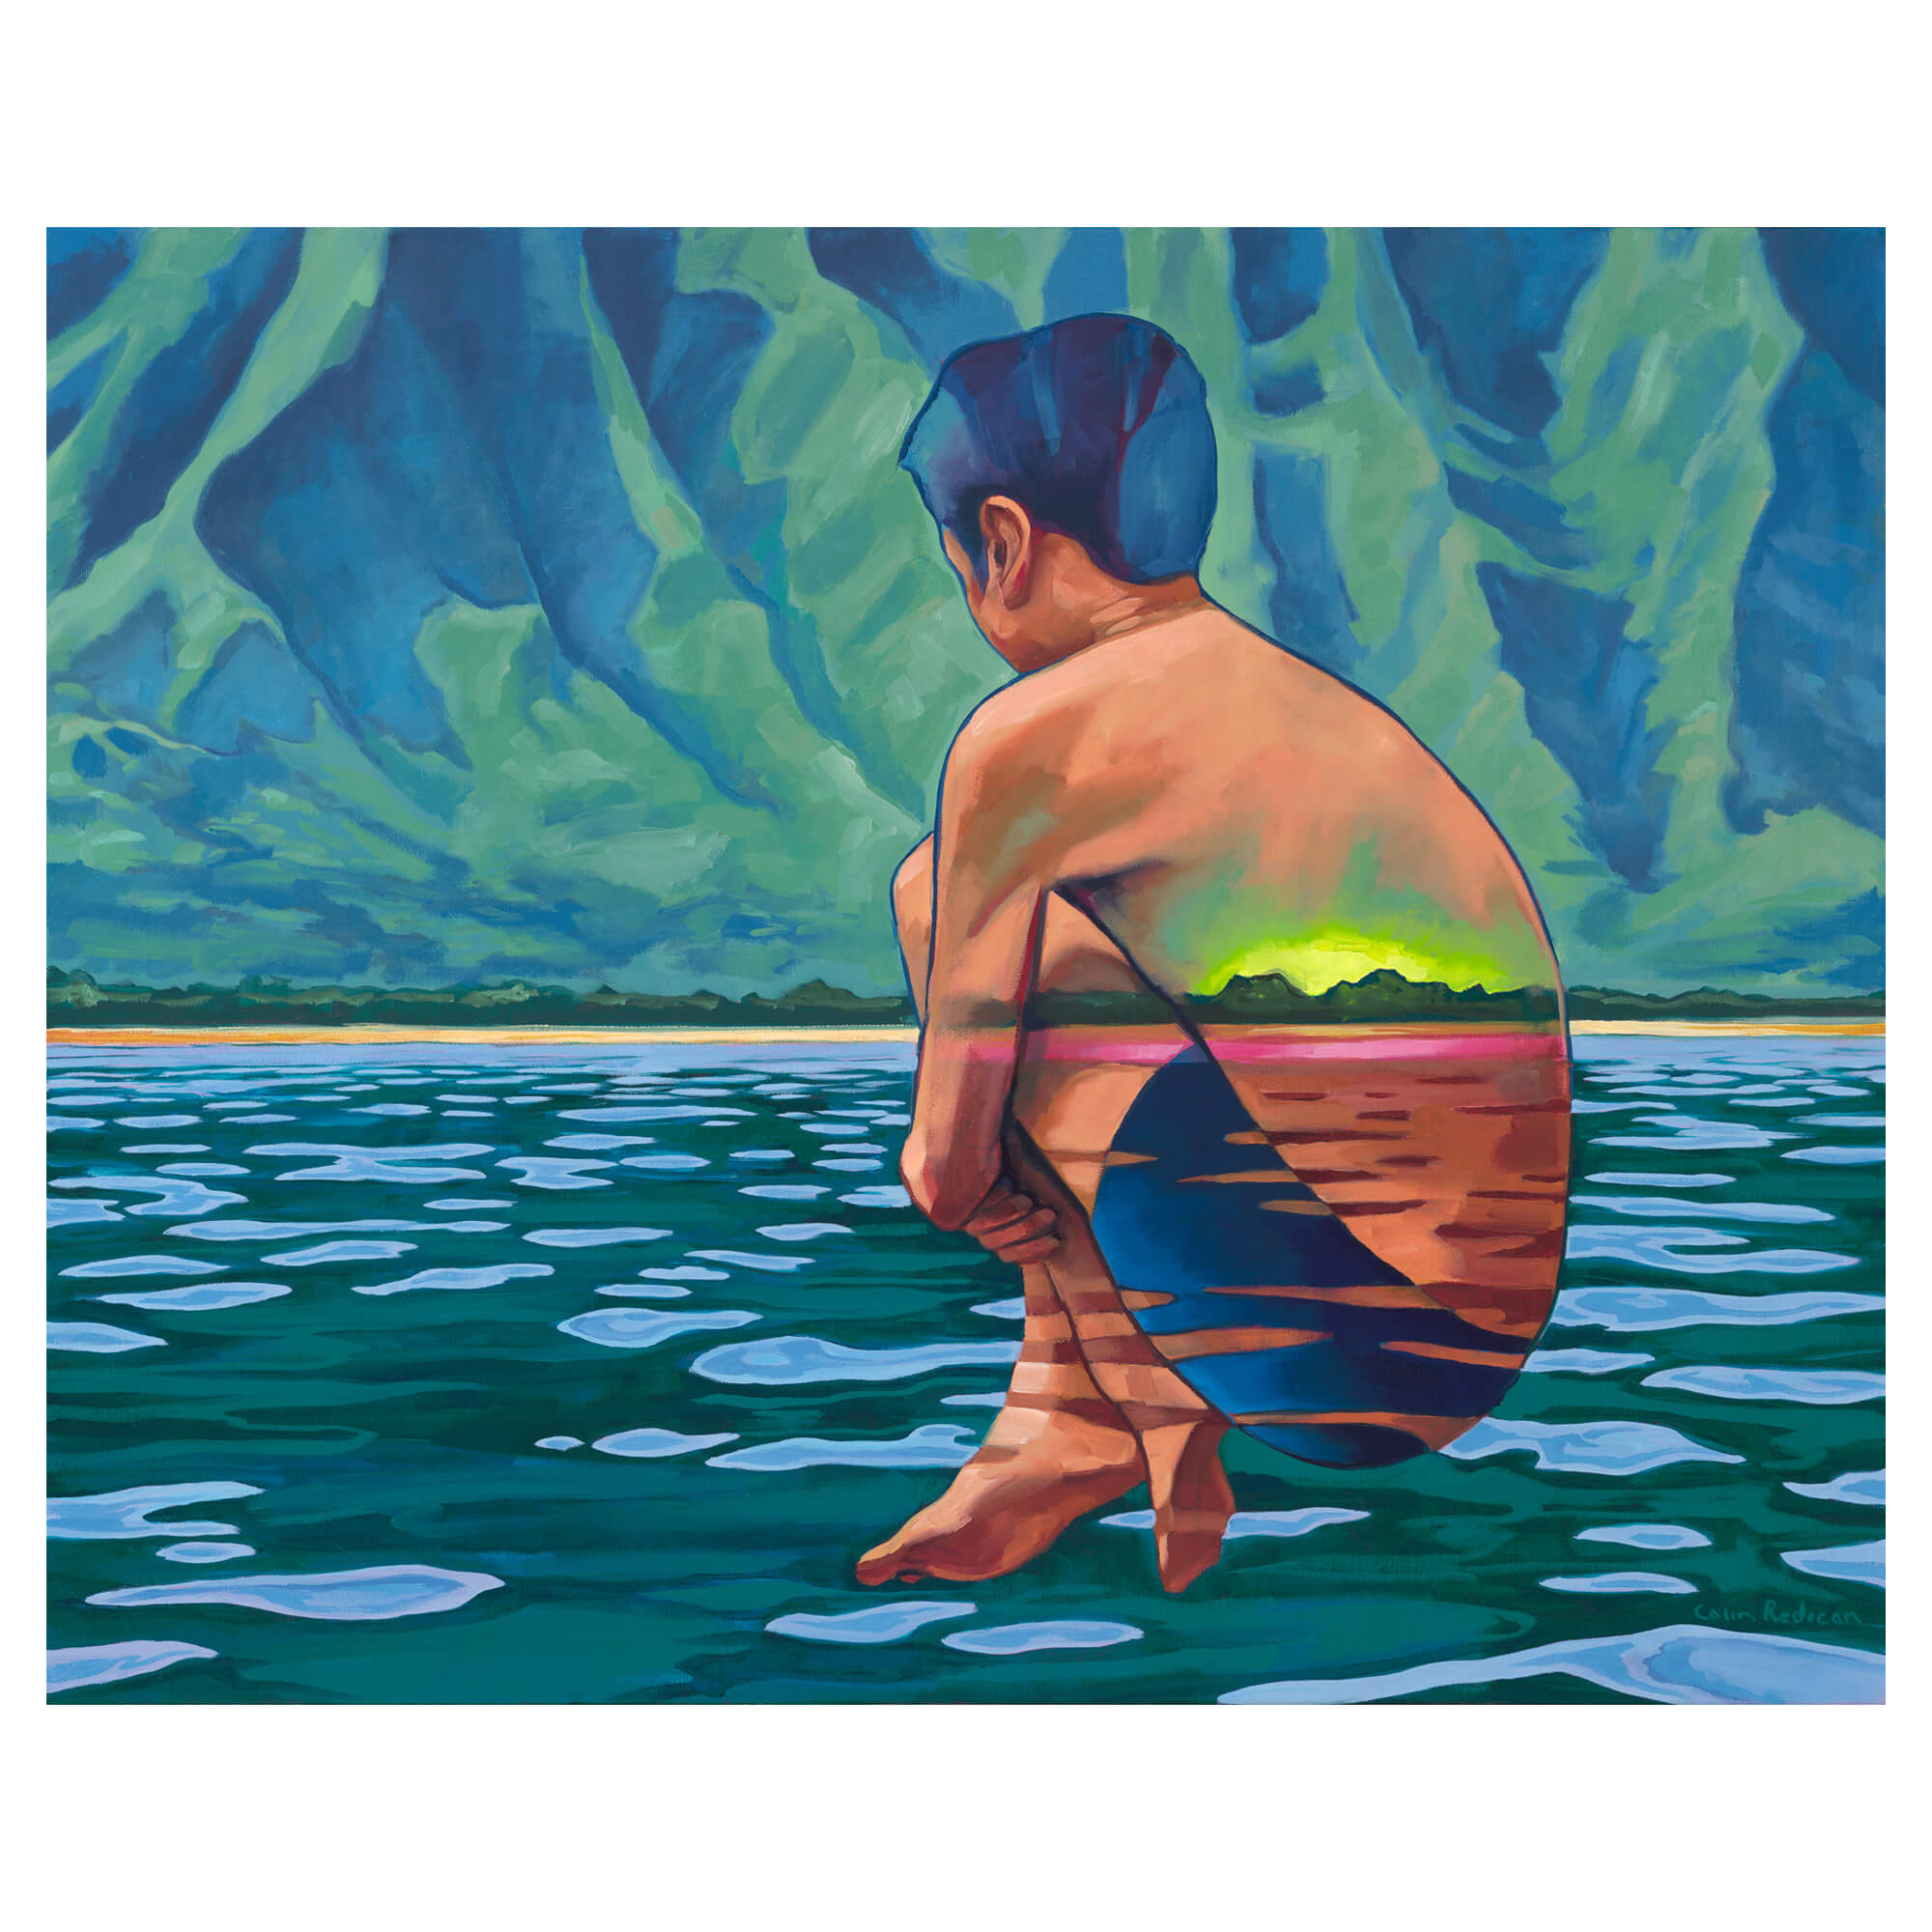 Artist Colin Redican from Hawaii depicts a youngster leaping into the ocean